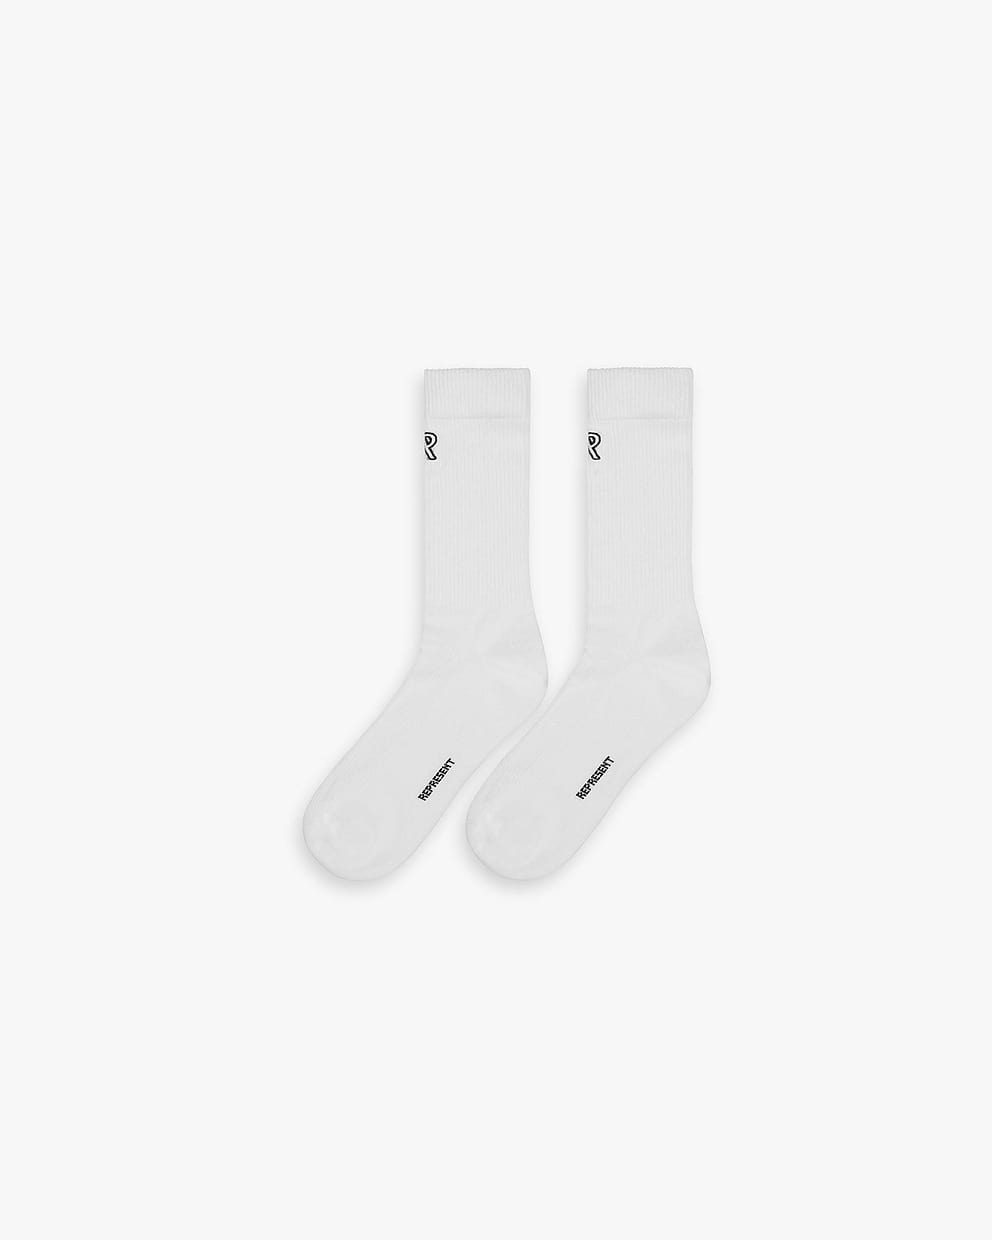 Initial Embroidered Socks - Flat White